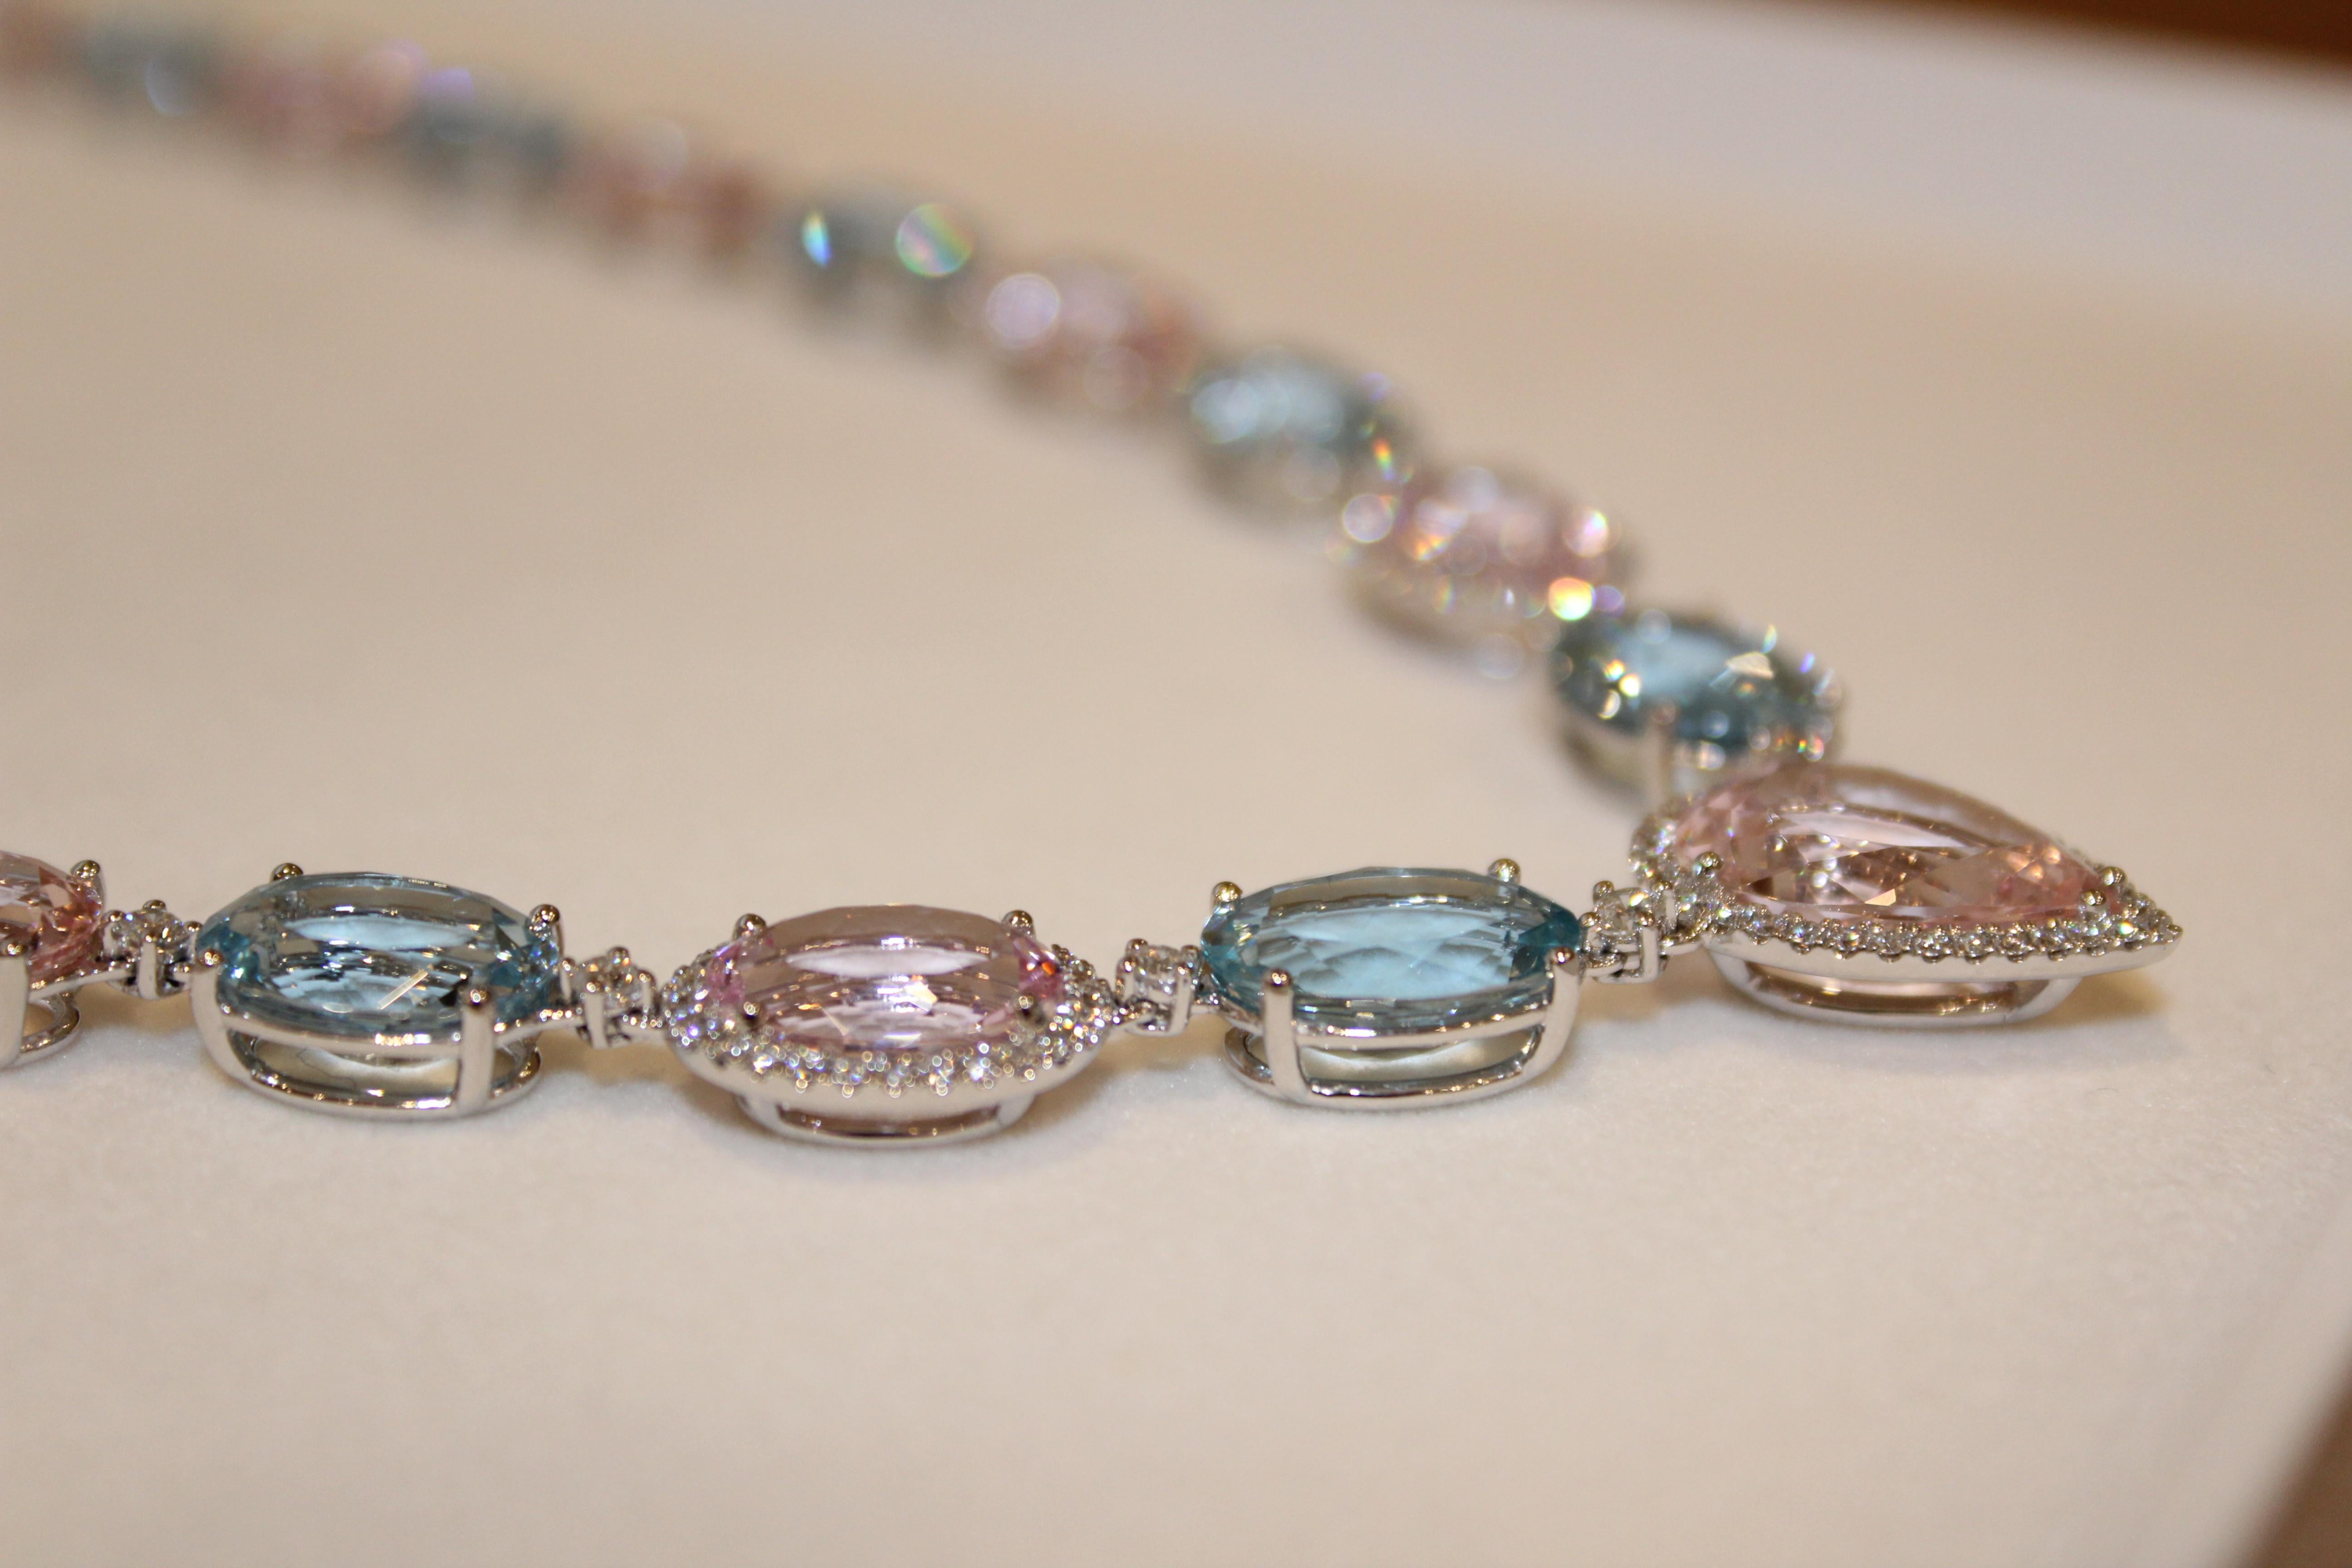 A unique Aquamarine and Morganite (80.09ct) necklace set in 18ct White Gold designed by Kiki McDonough.
This showstopping piece boasts a large central pear cut baby-pink morganite stone accentuated with oval cut aquamarine and morganite around the